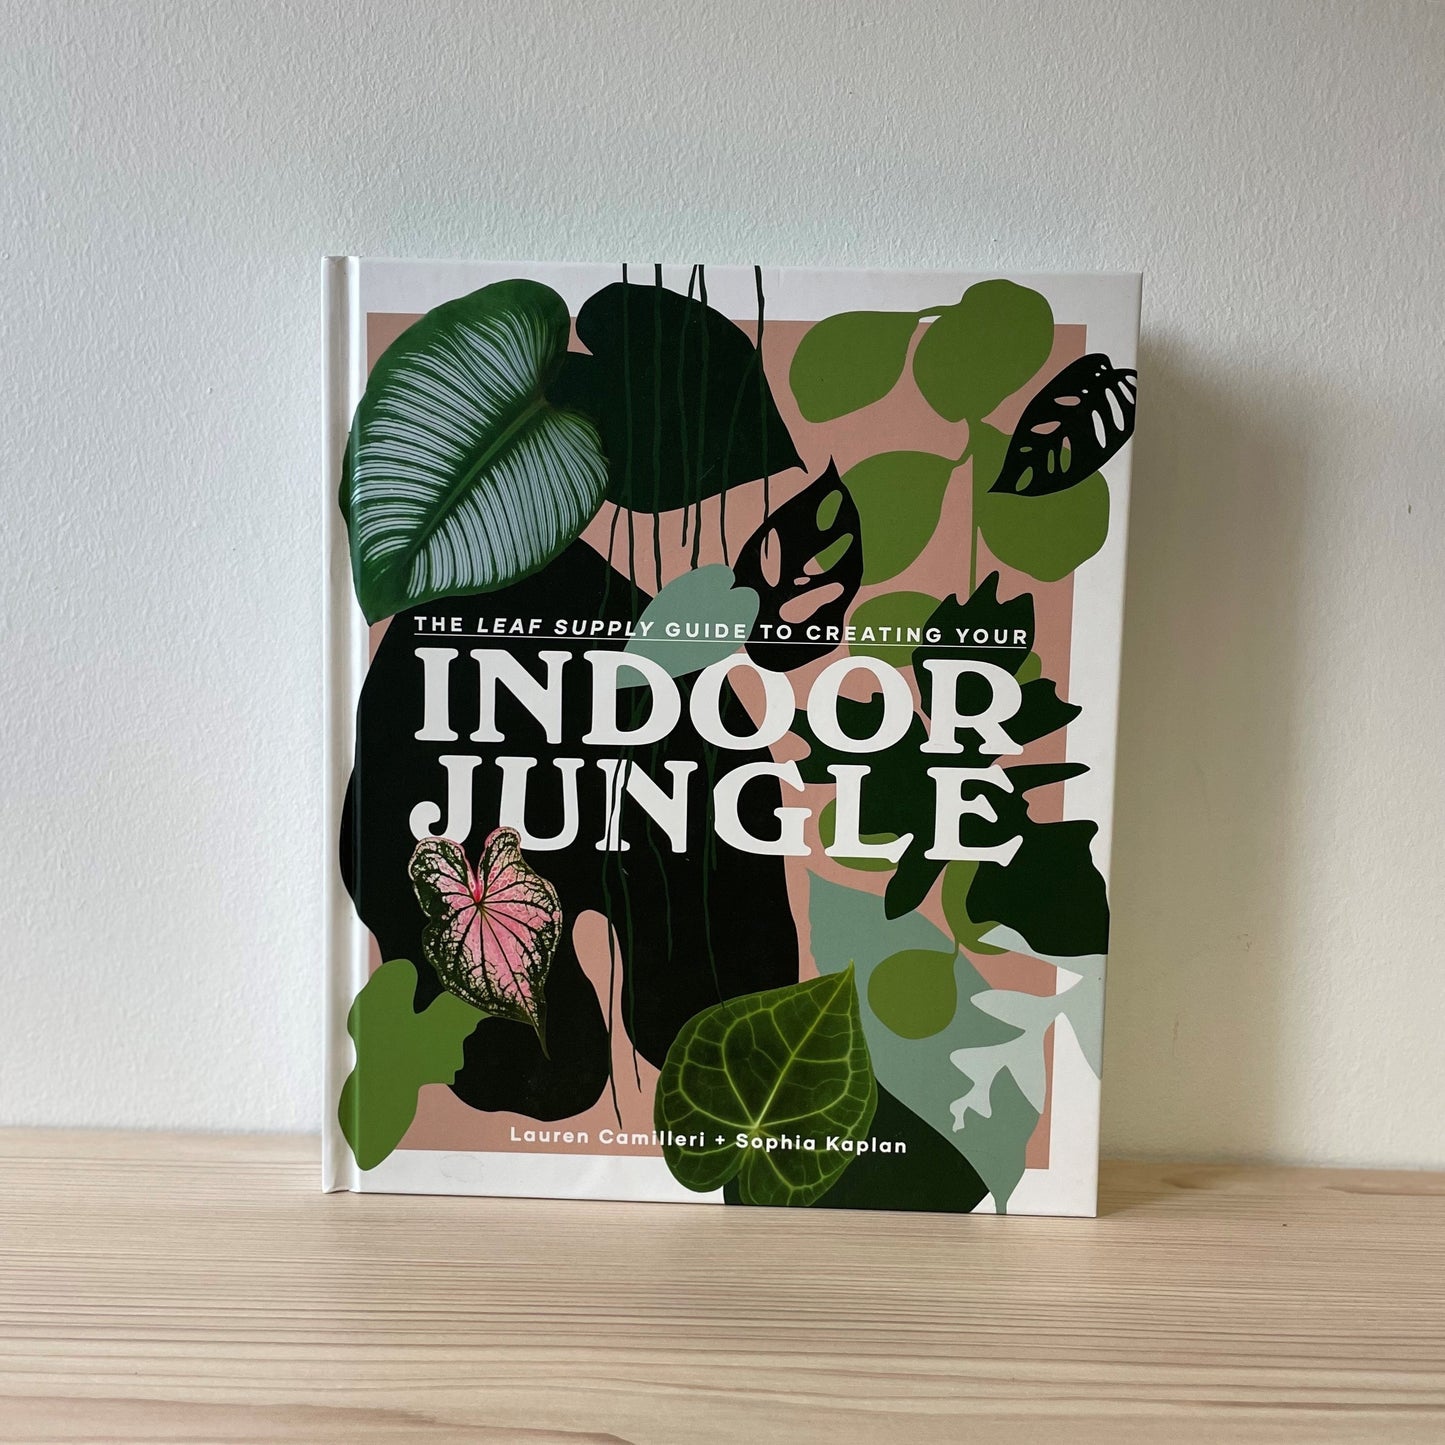 The Leaf Supply Guide to Creating your Indoor Jungle